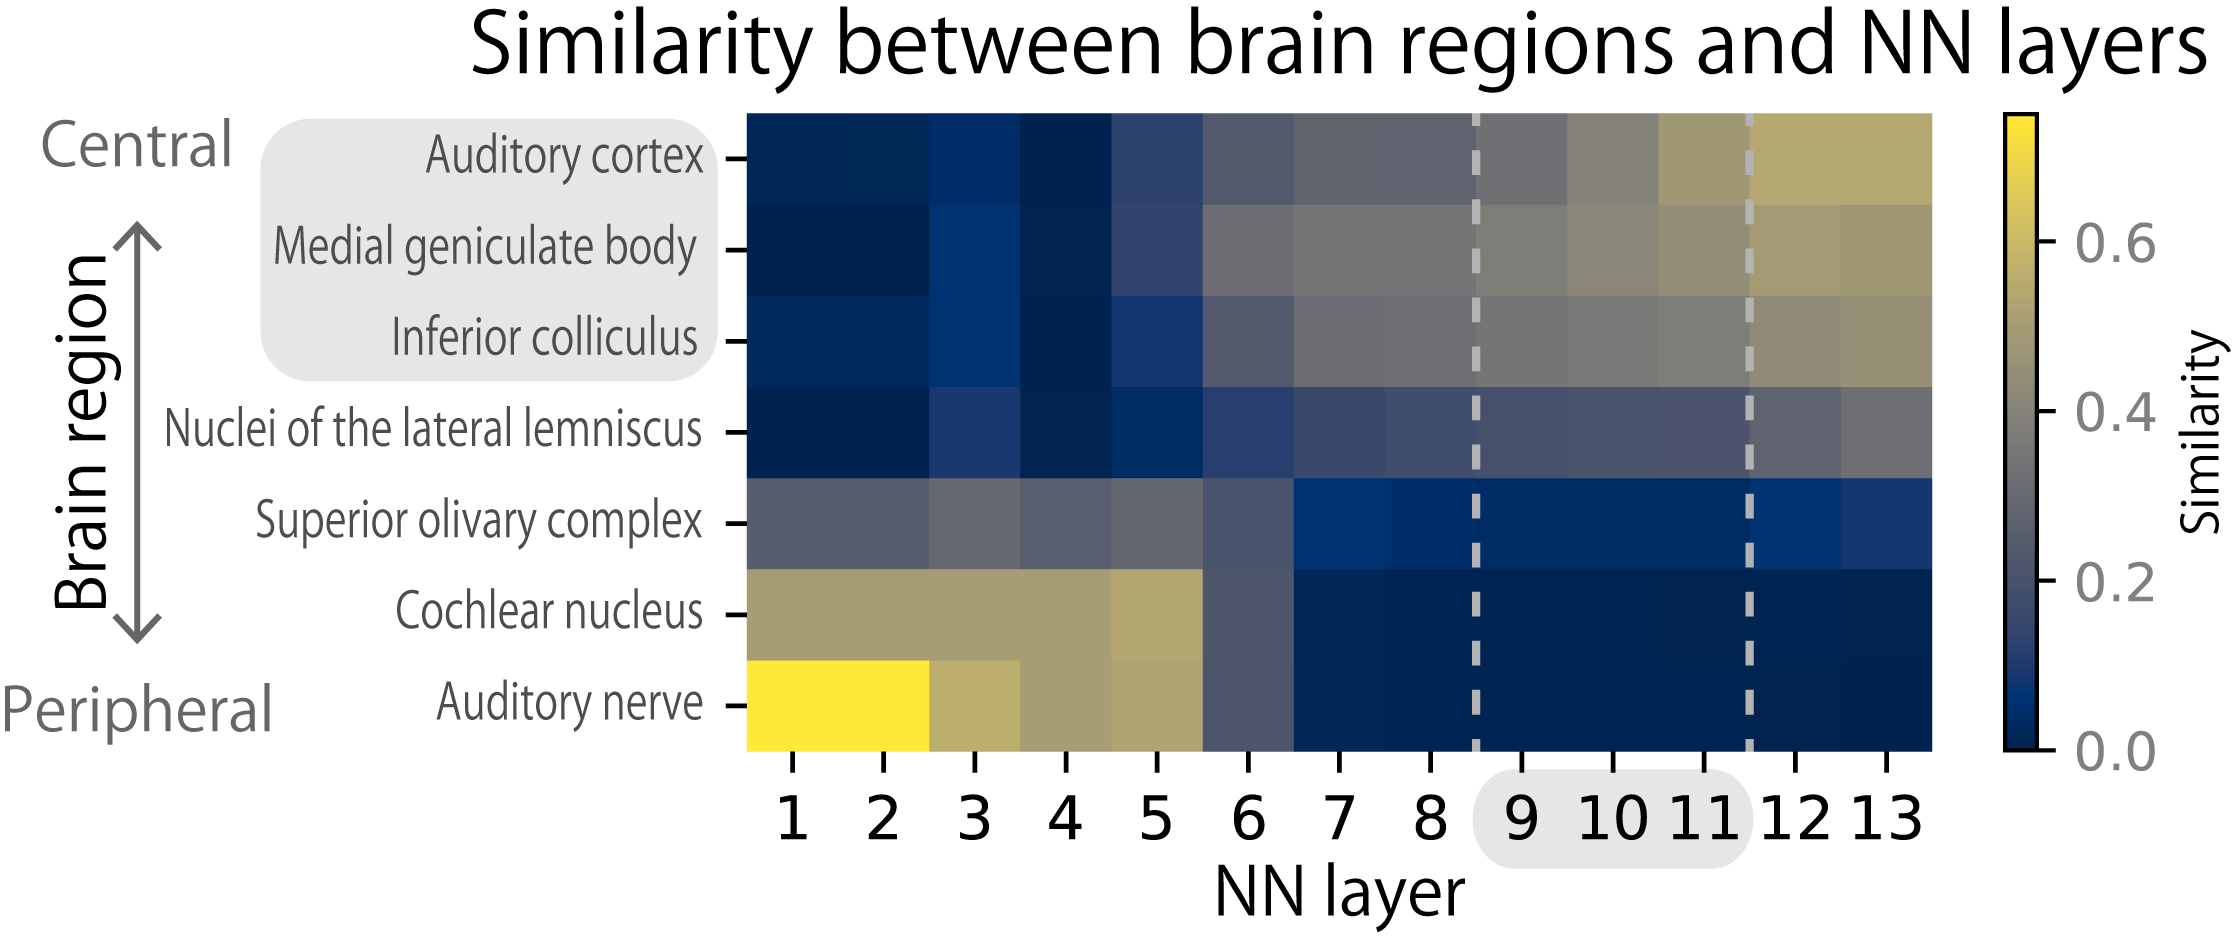 Figure 4 Correspondence between NN layers (horizontal axis) and brain regions (vertical axis). The brightness of the colors indicates similarity. The layers showing human-like AM detection thresholds in Figure 3 (around layers 9-11, gray background on the horizontal axis) are similar to the inferior colliculus, the medial geniculate body, and the auditory cortex (gray background on the vertical axis).